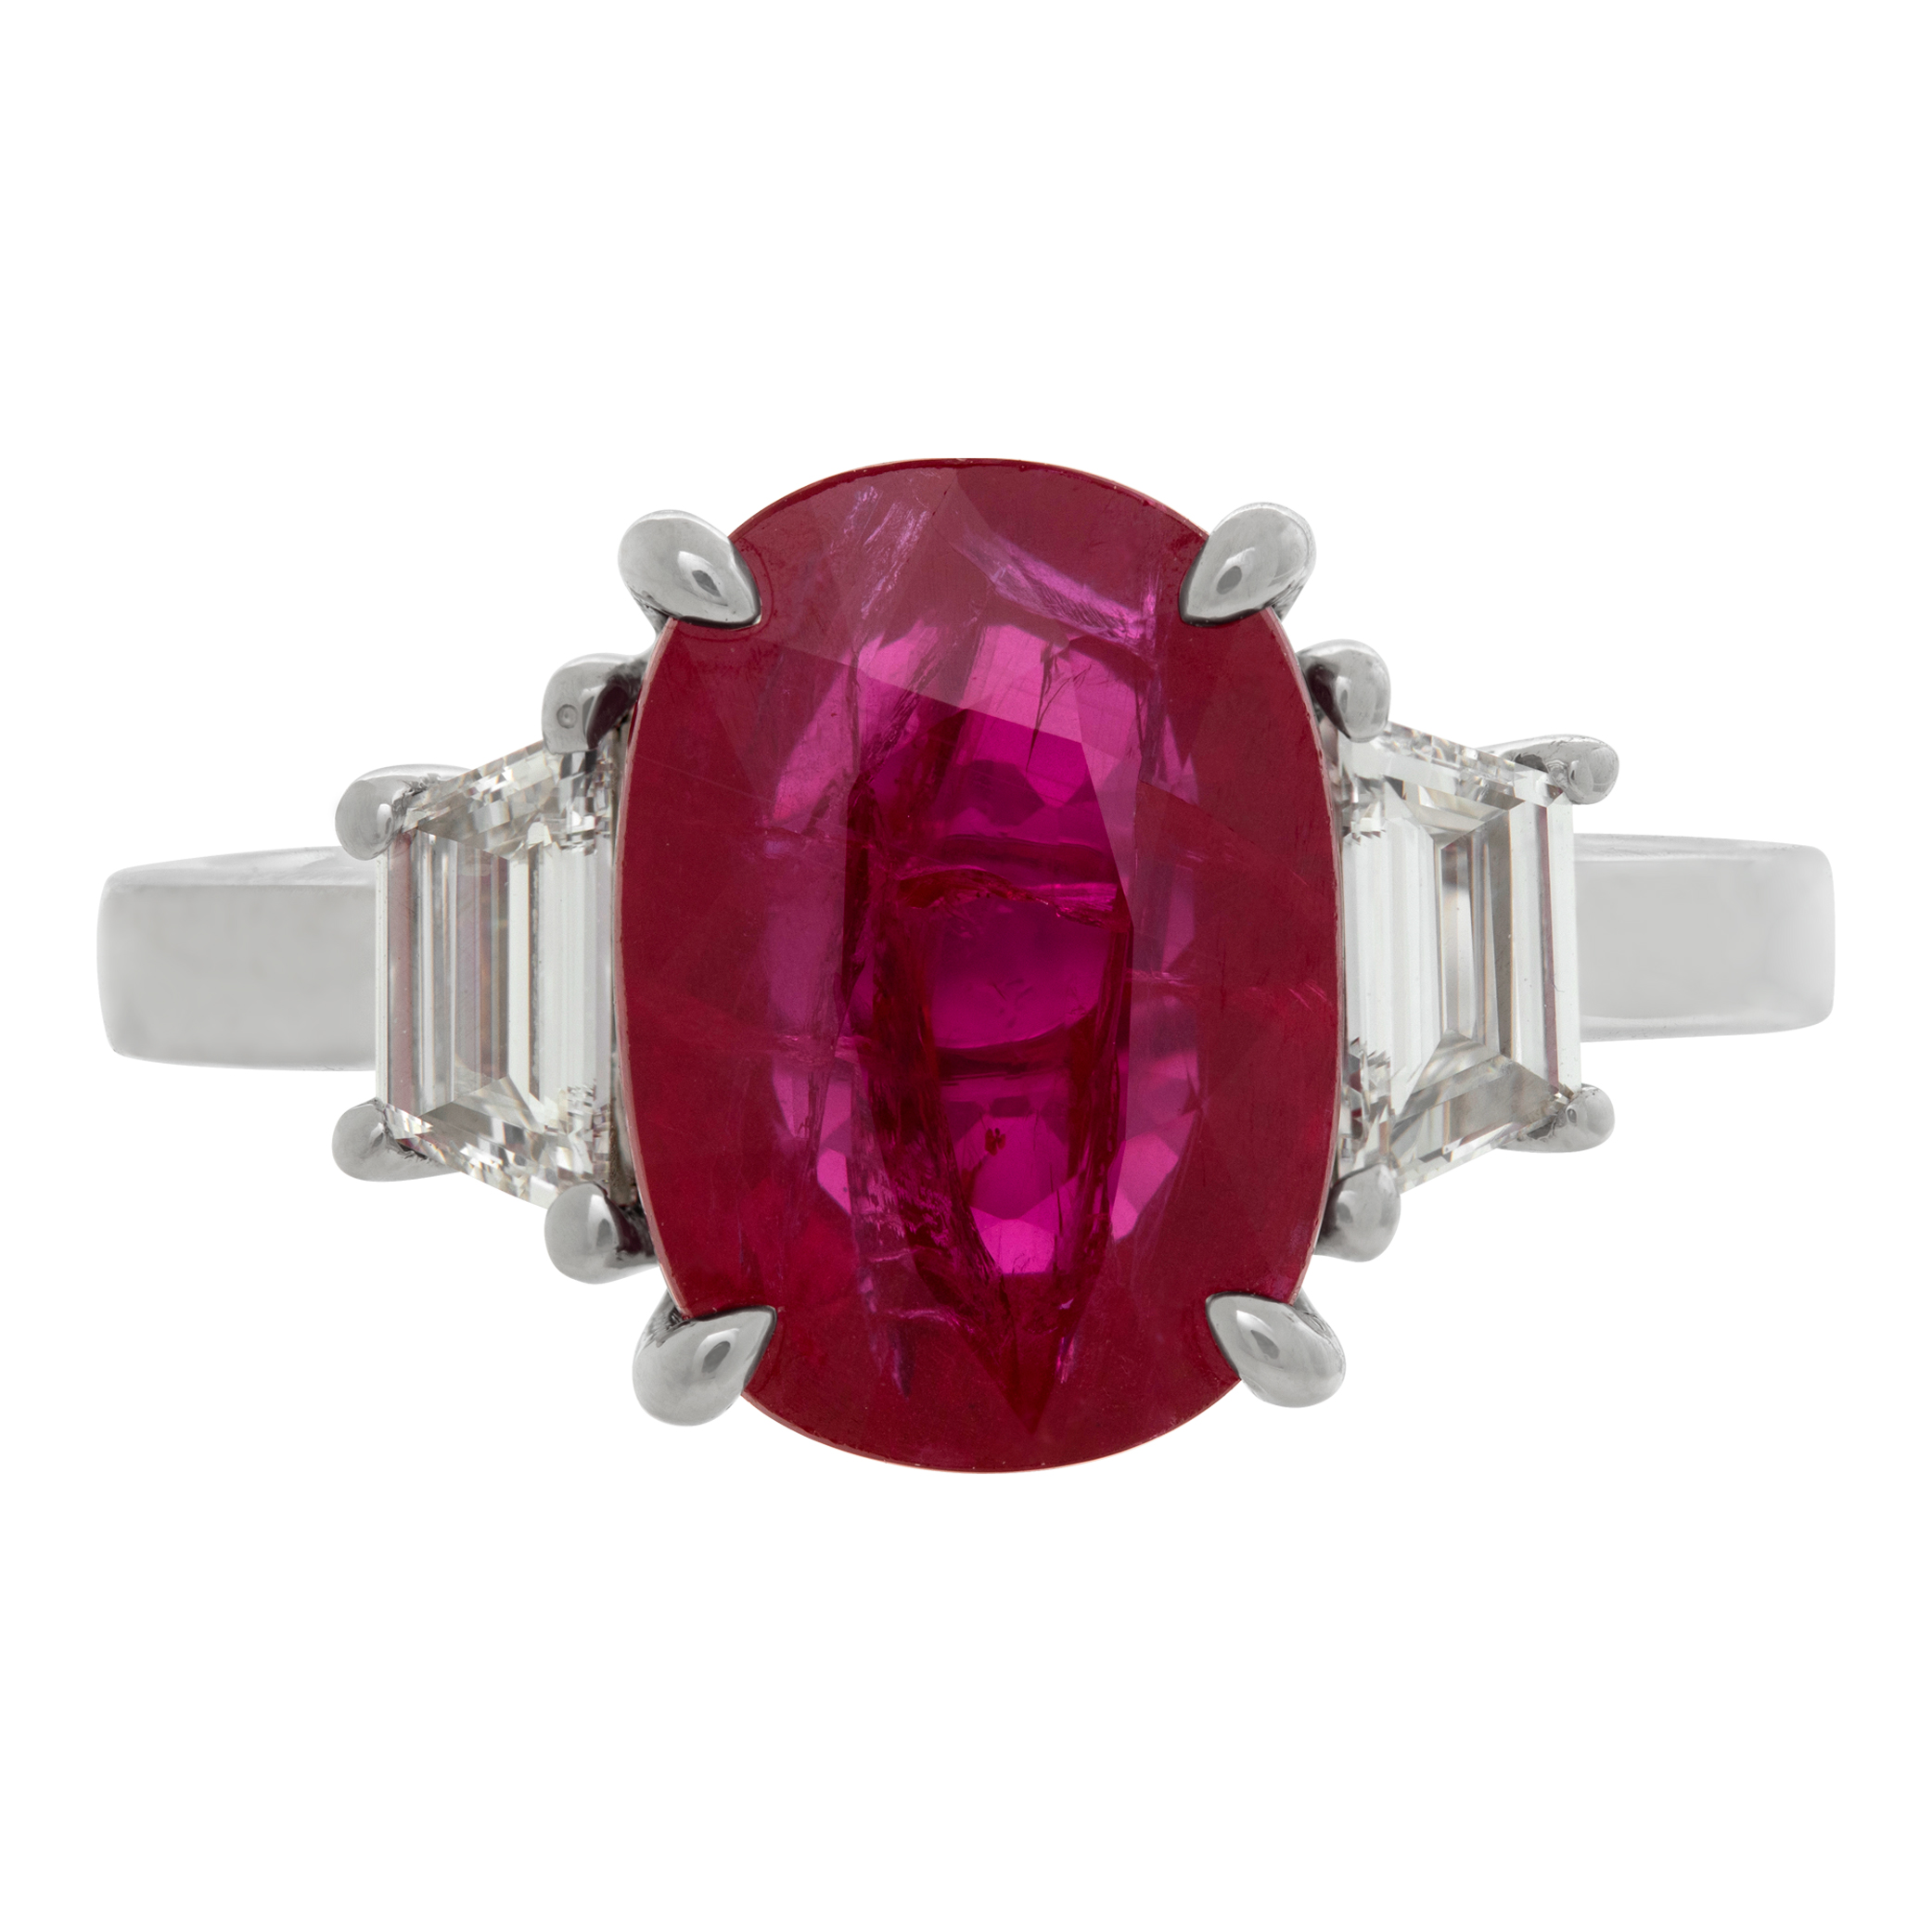 GIA Certified ruby & diamonds ring set in platinum. Brilliant oval cut ruby: 5.03 carats image 2